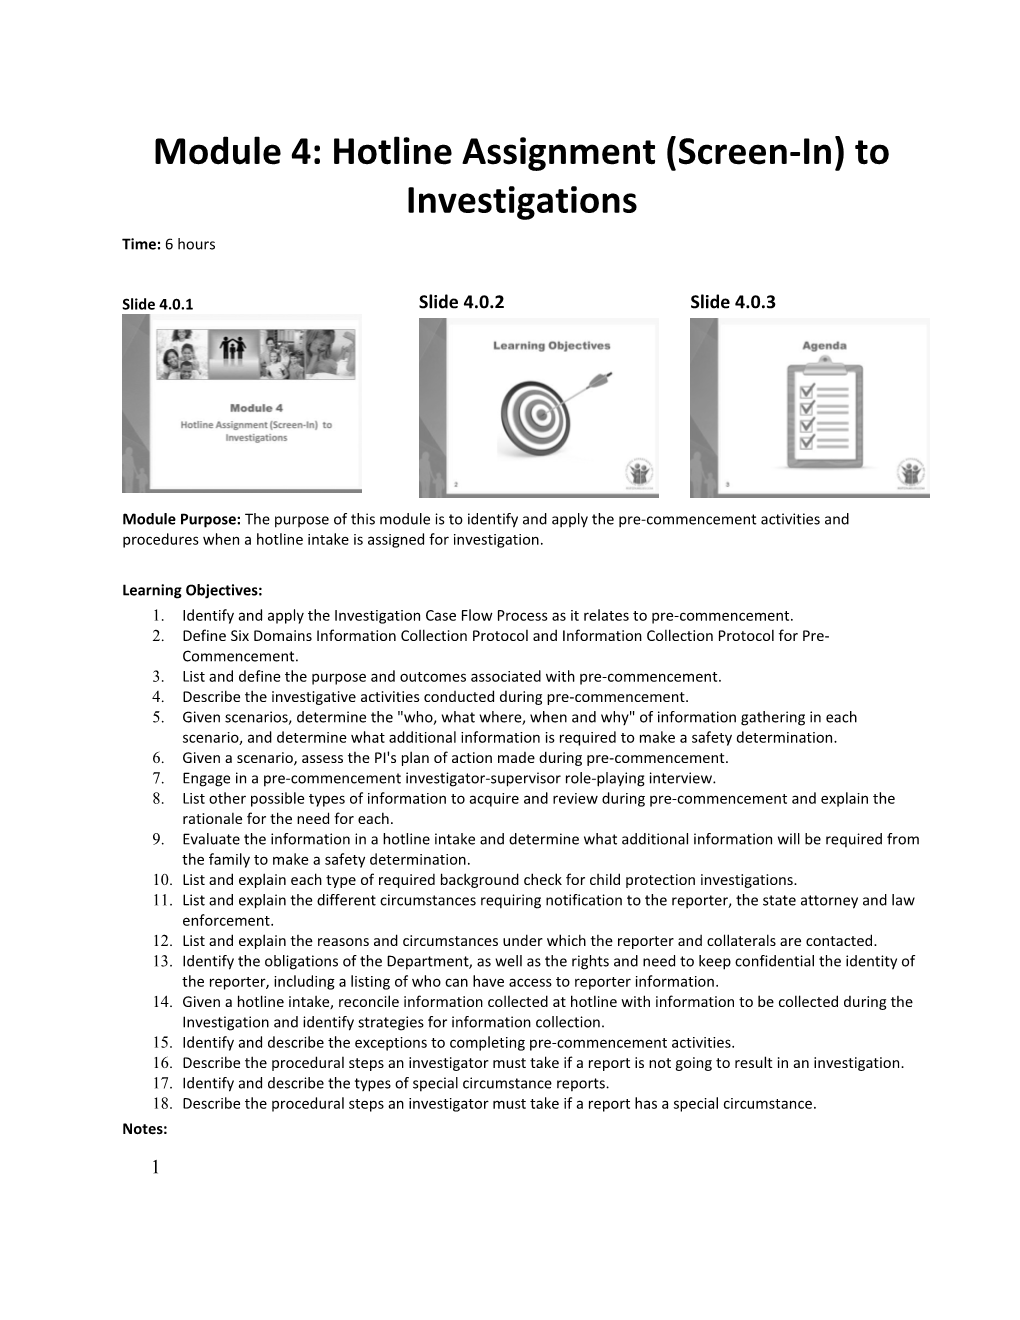 Identify and Apply the Investigation Case Flow Process As It Relates to Pre-Commencement